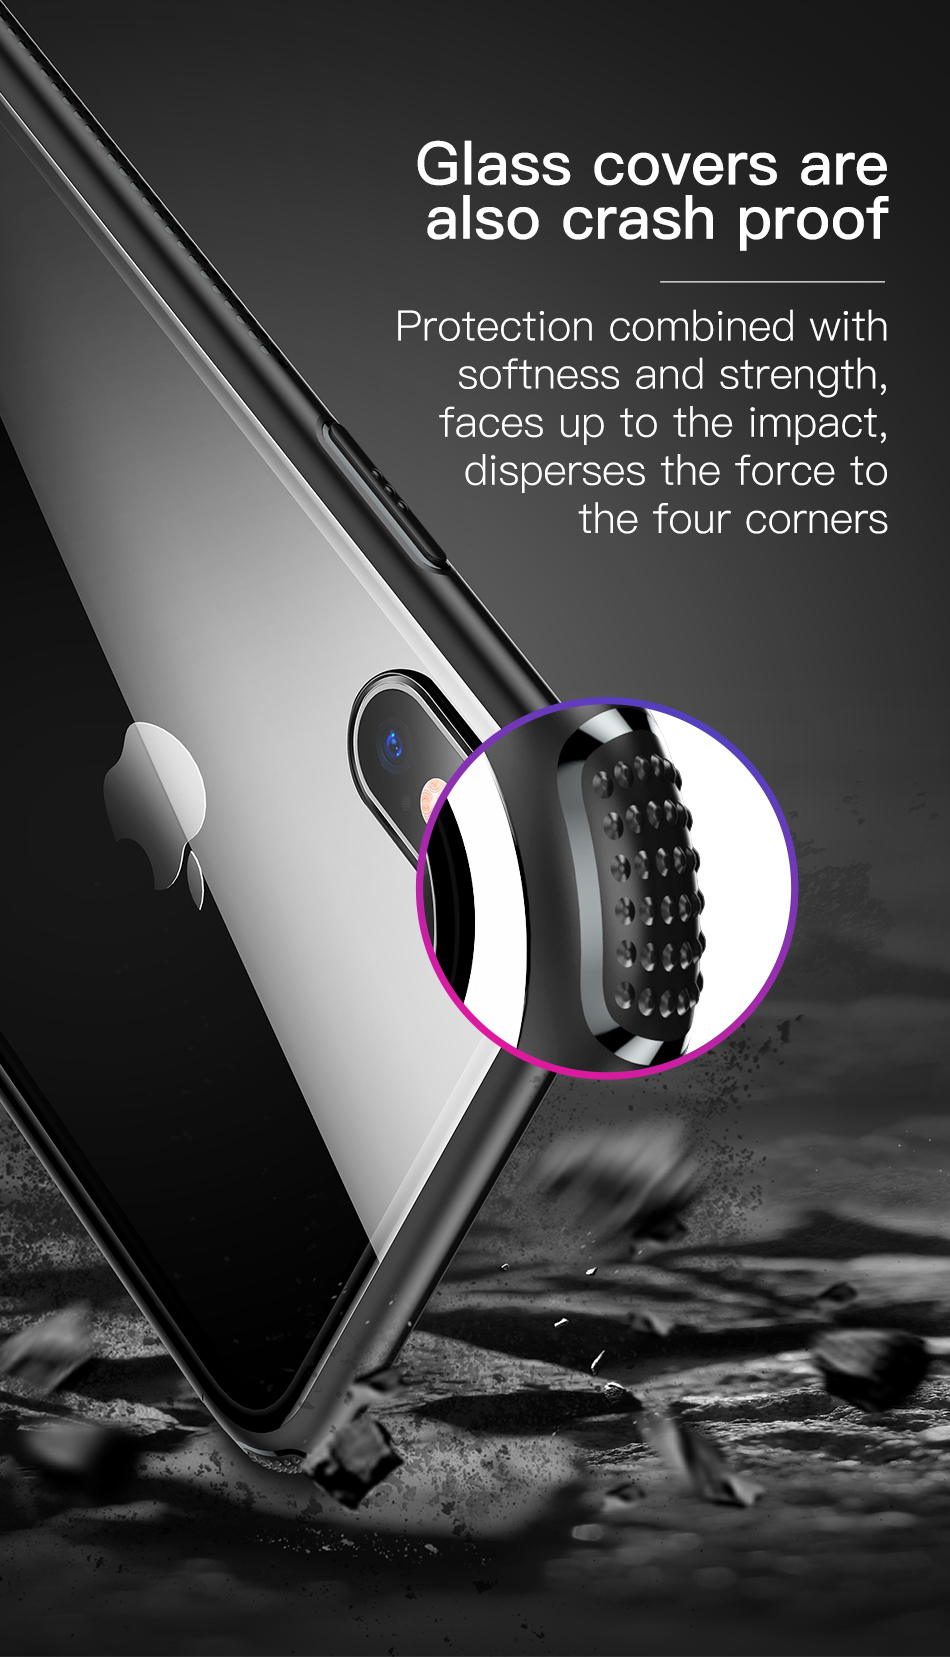 Baseus-Protective-Case-For-iPhone-XS-Clear-Scratch-Resistant-Tempered-Glass-Back-CoverSoft-TPU-Frame-1357558-6